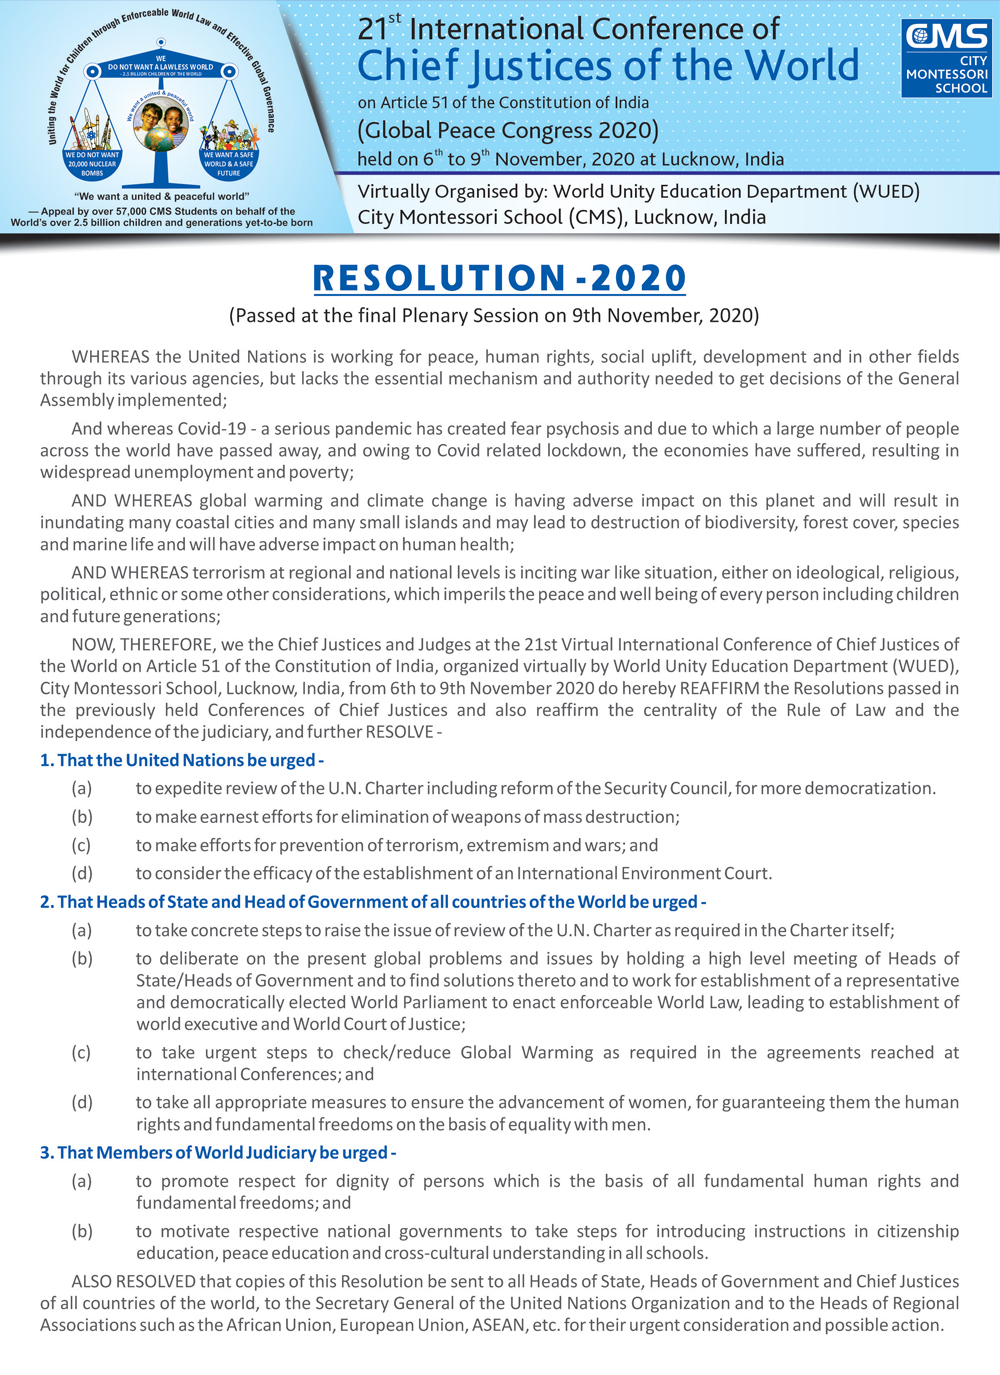 ICCJW Resolutions